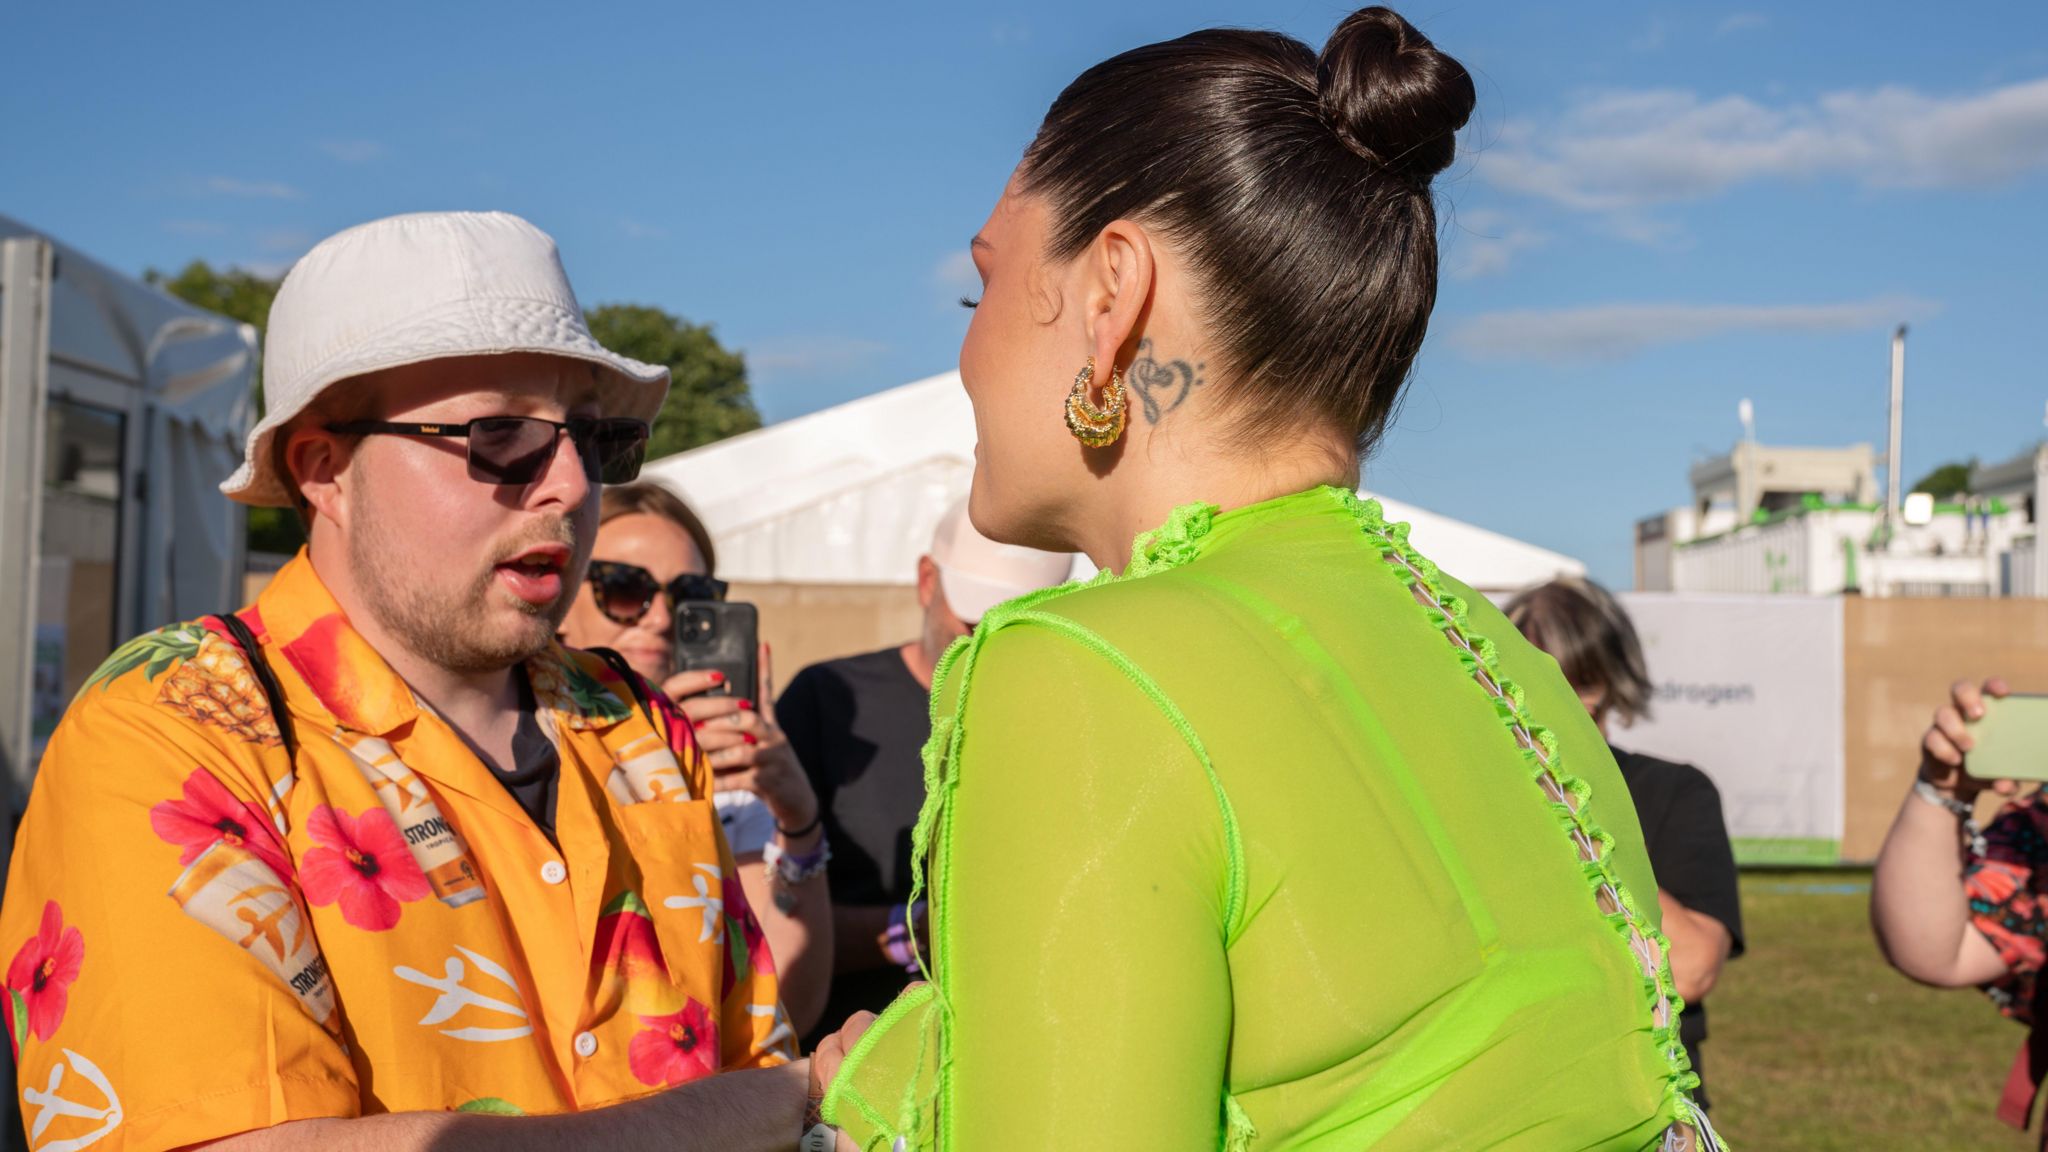 Jessie J wearing a green outfit staring and holding the hands of Nathan who is wearing an orange shirt with pink flowers printed on it, he is also wearing a white bucket hat and sunglasses on what is a sunny day backstage at the festival. People are surrounding the pair and are taking photographs of them using mobile phones.